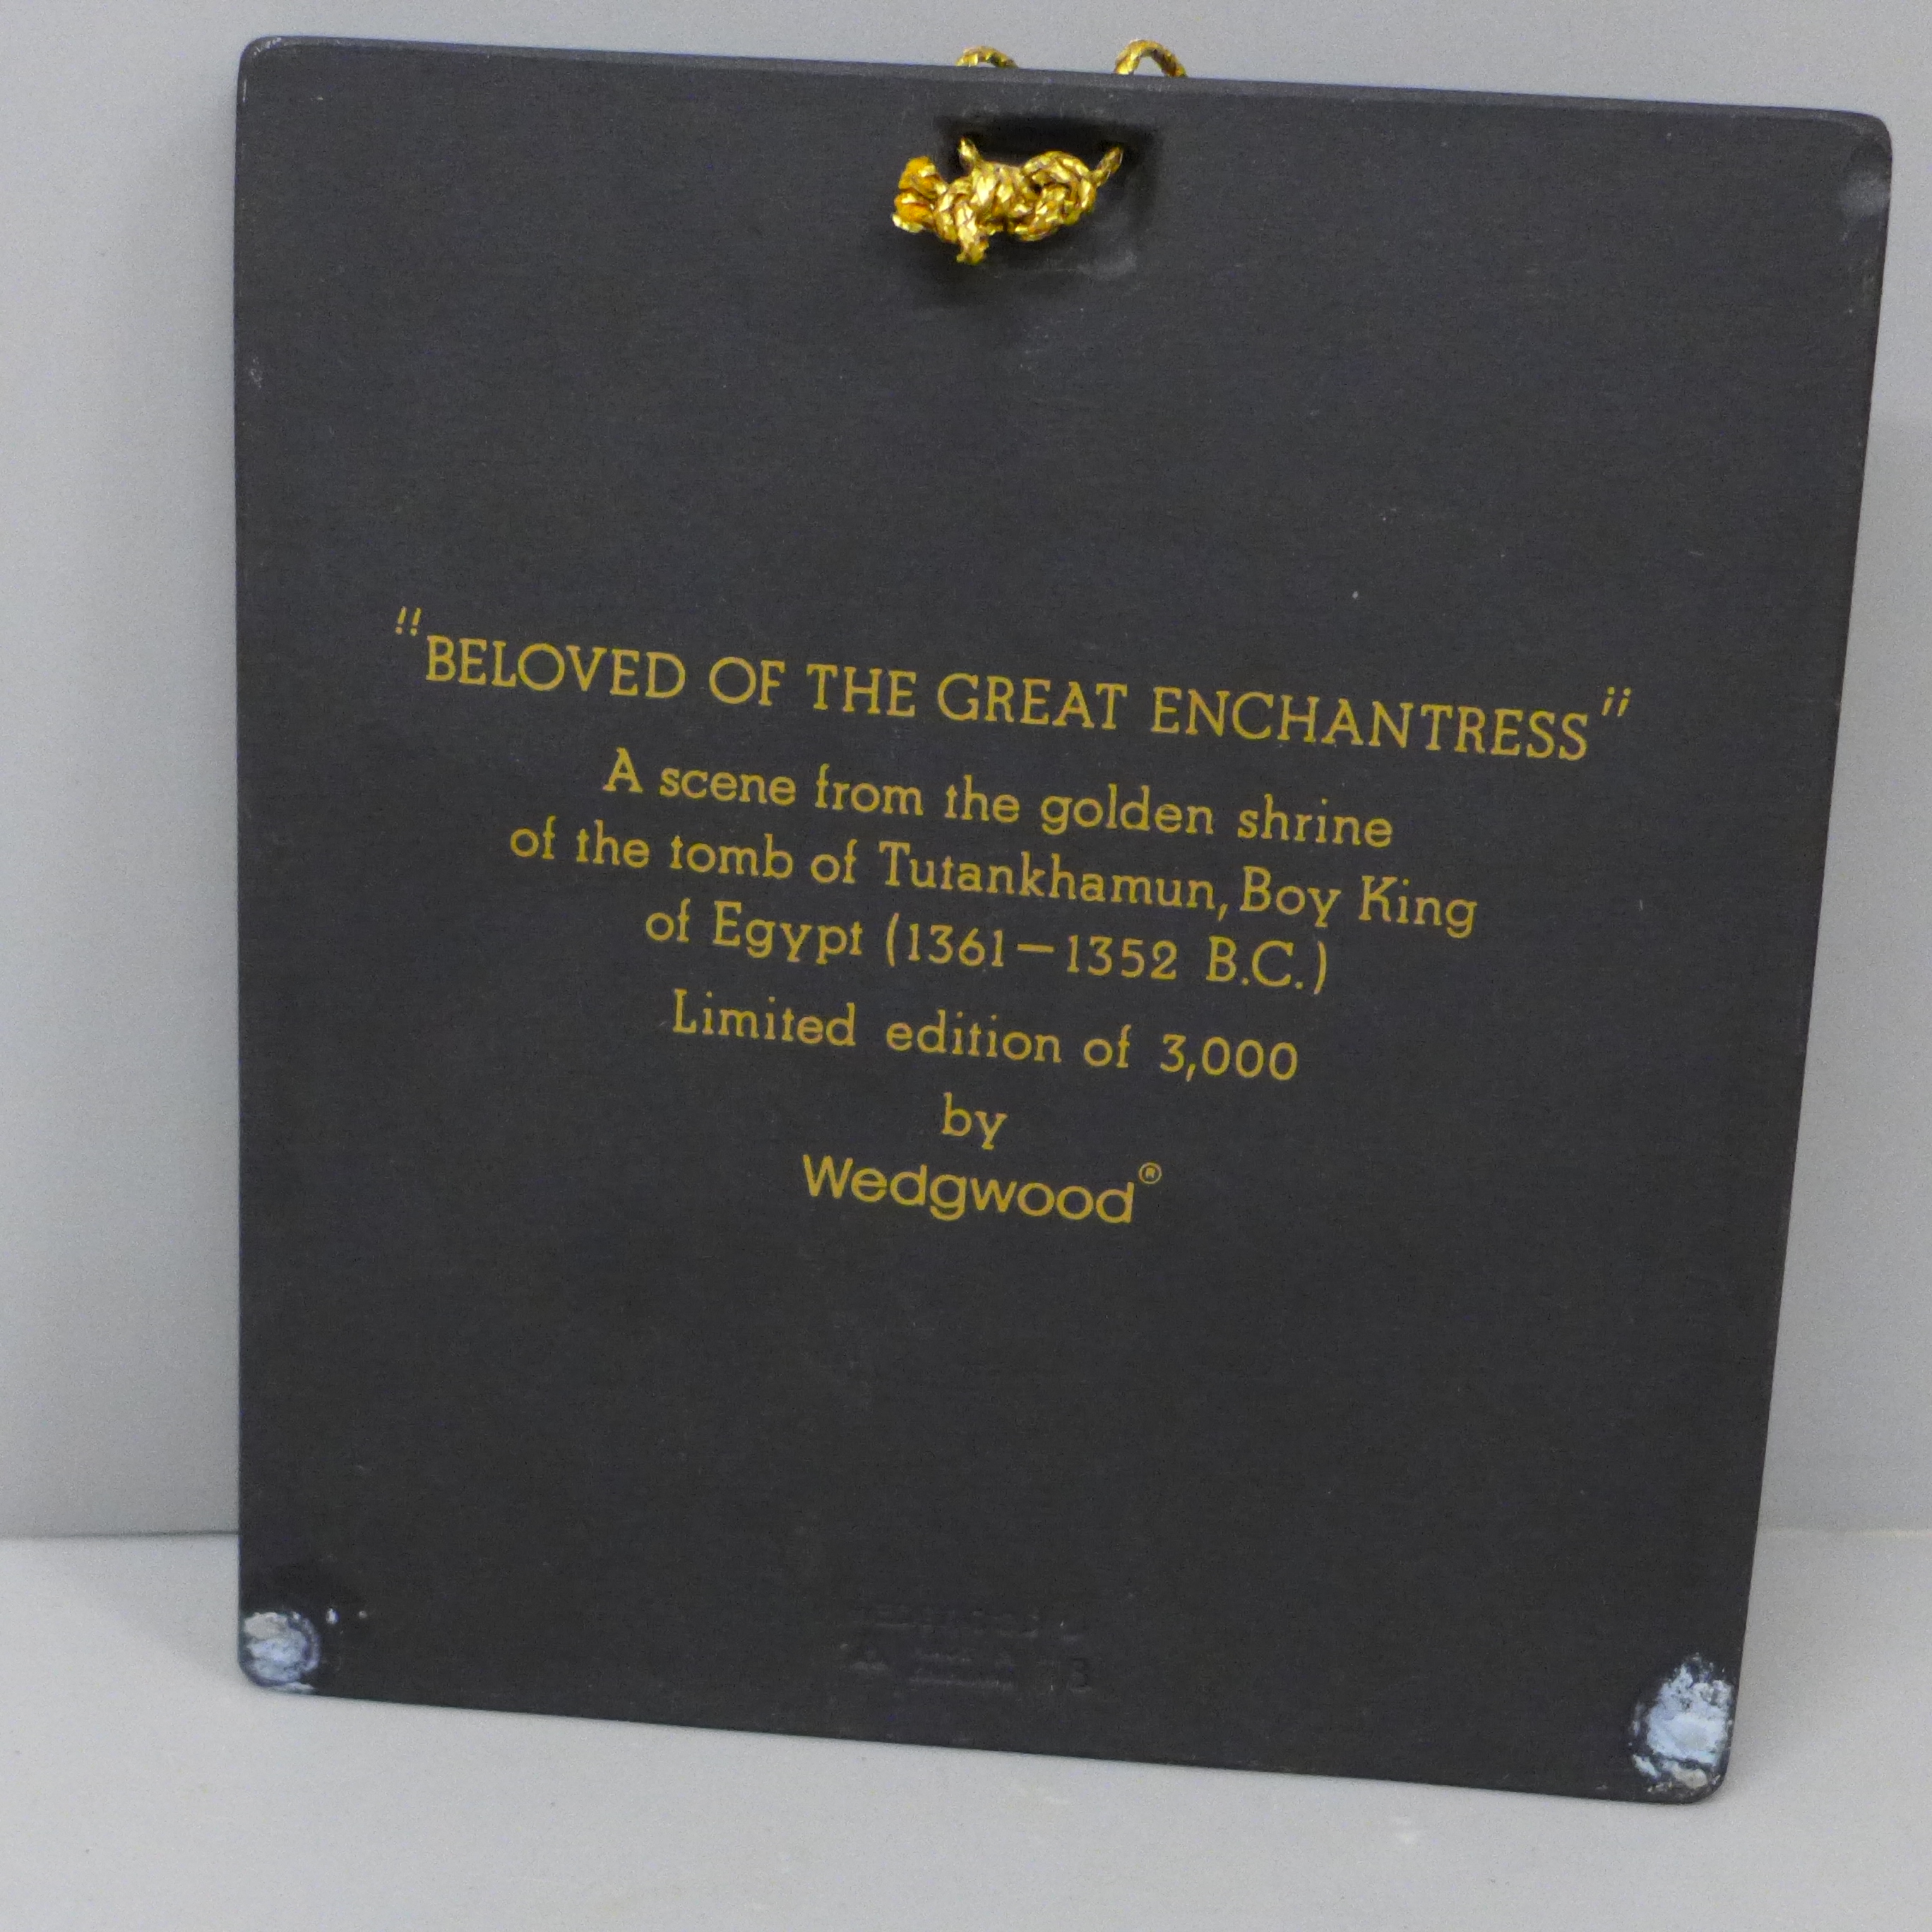 'Beloved of the Great Enchantress', a Wedgwood limited edition plaque of 3000, 10cm x 11cm - Image 2 of 2